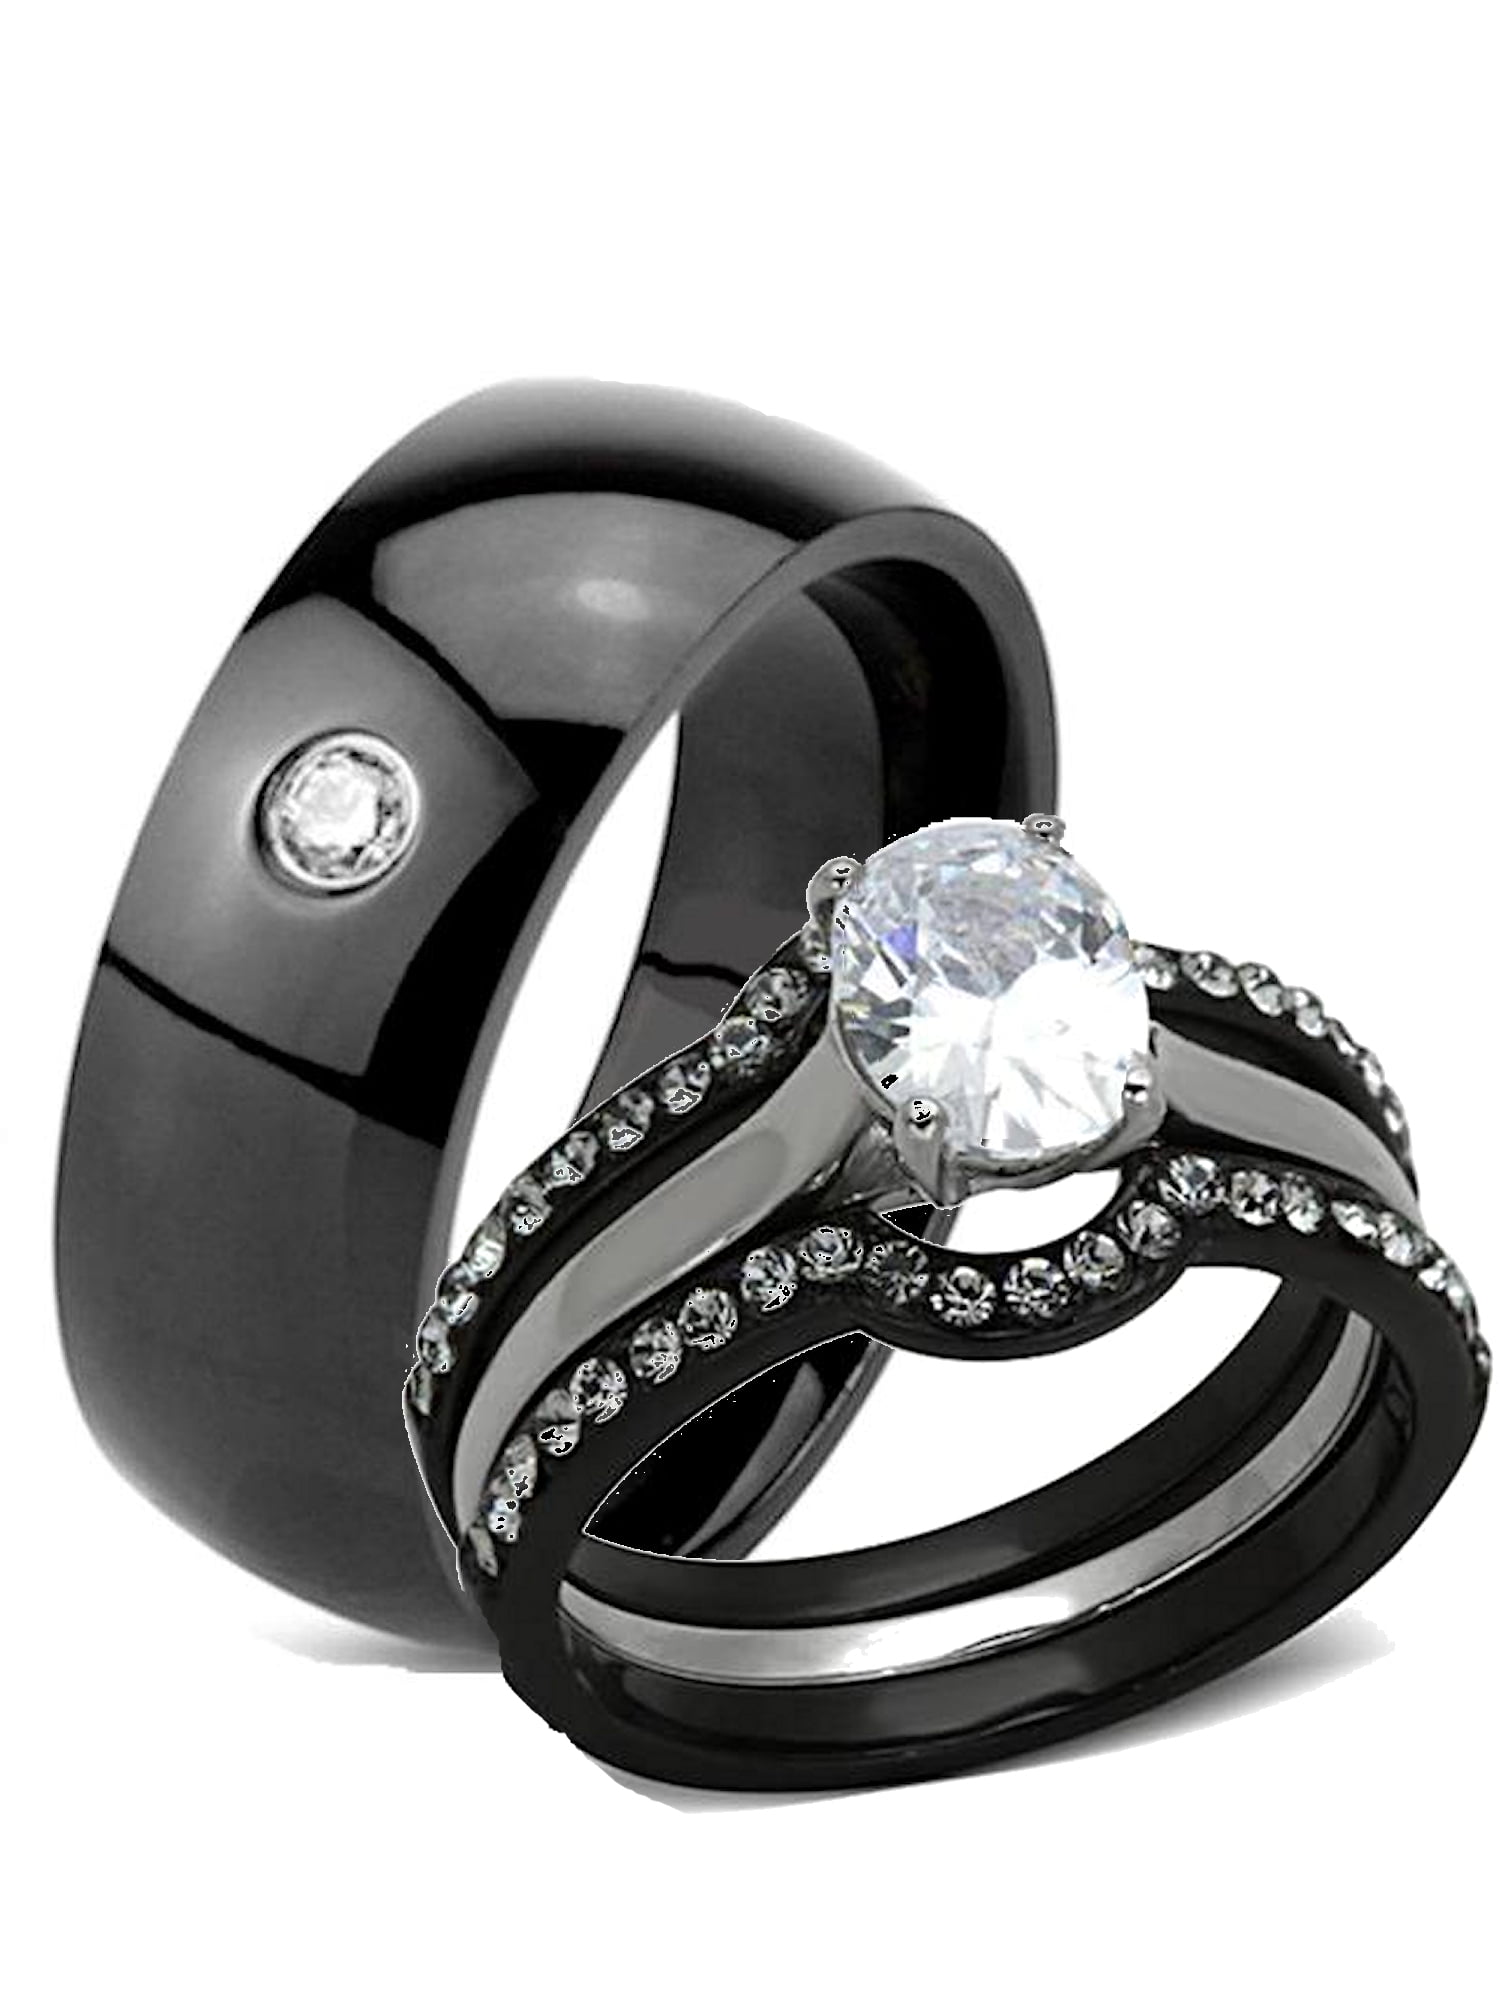 Glittery Black Ion Plated Stainless Steel Zirconia Wedding Band Ring Size 5-13 